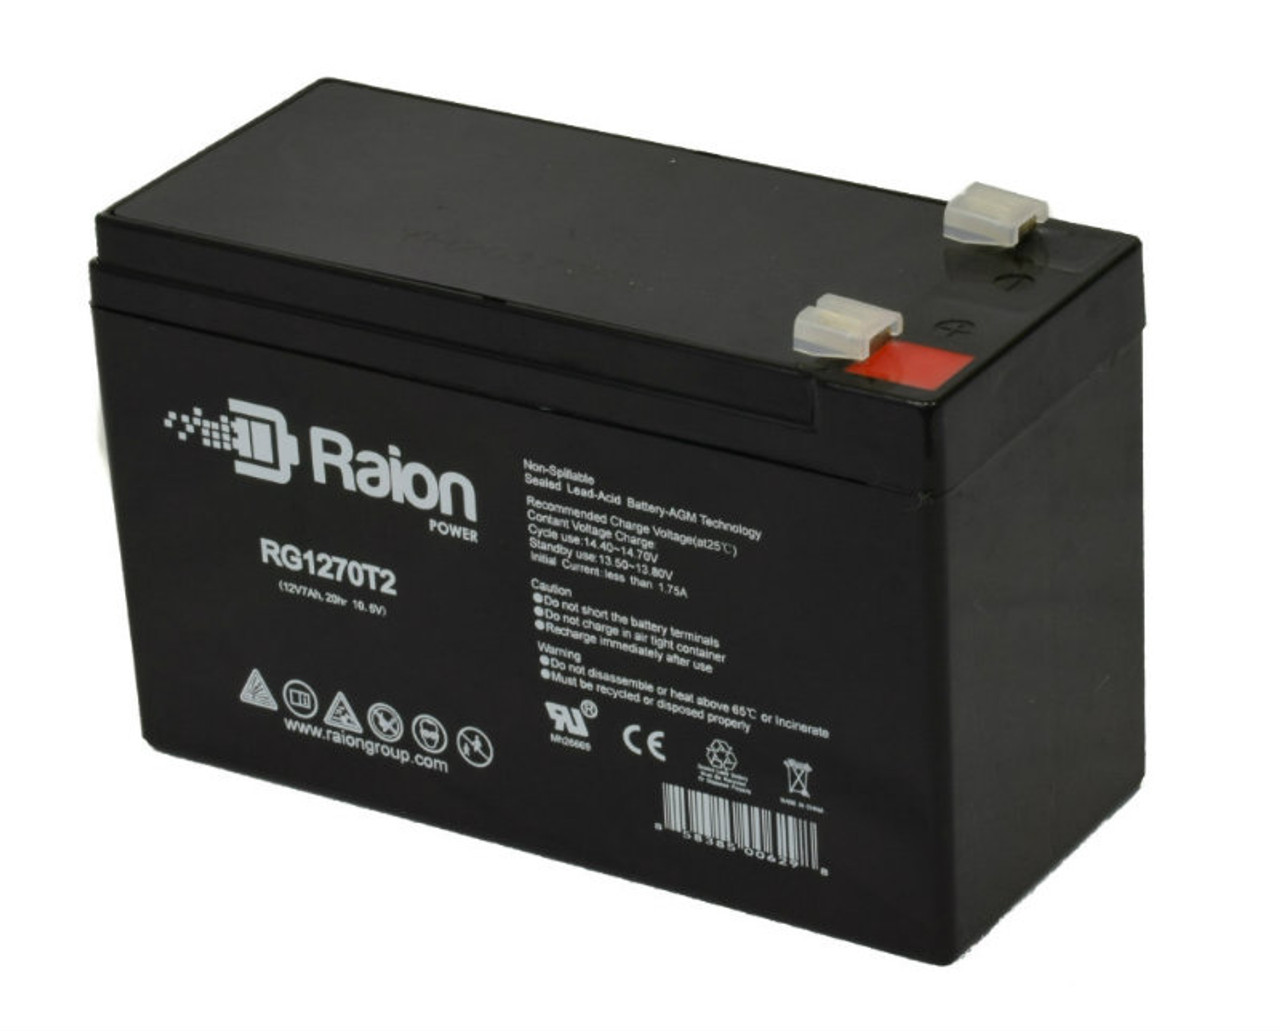 Raion Power Replacement 12V 7Ah RG1270T1 Fire Alarm Battery for Altronix MP3PMCTXPD8CB